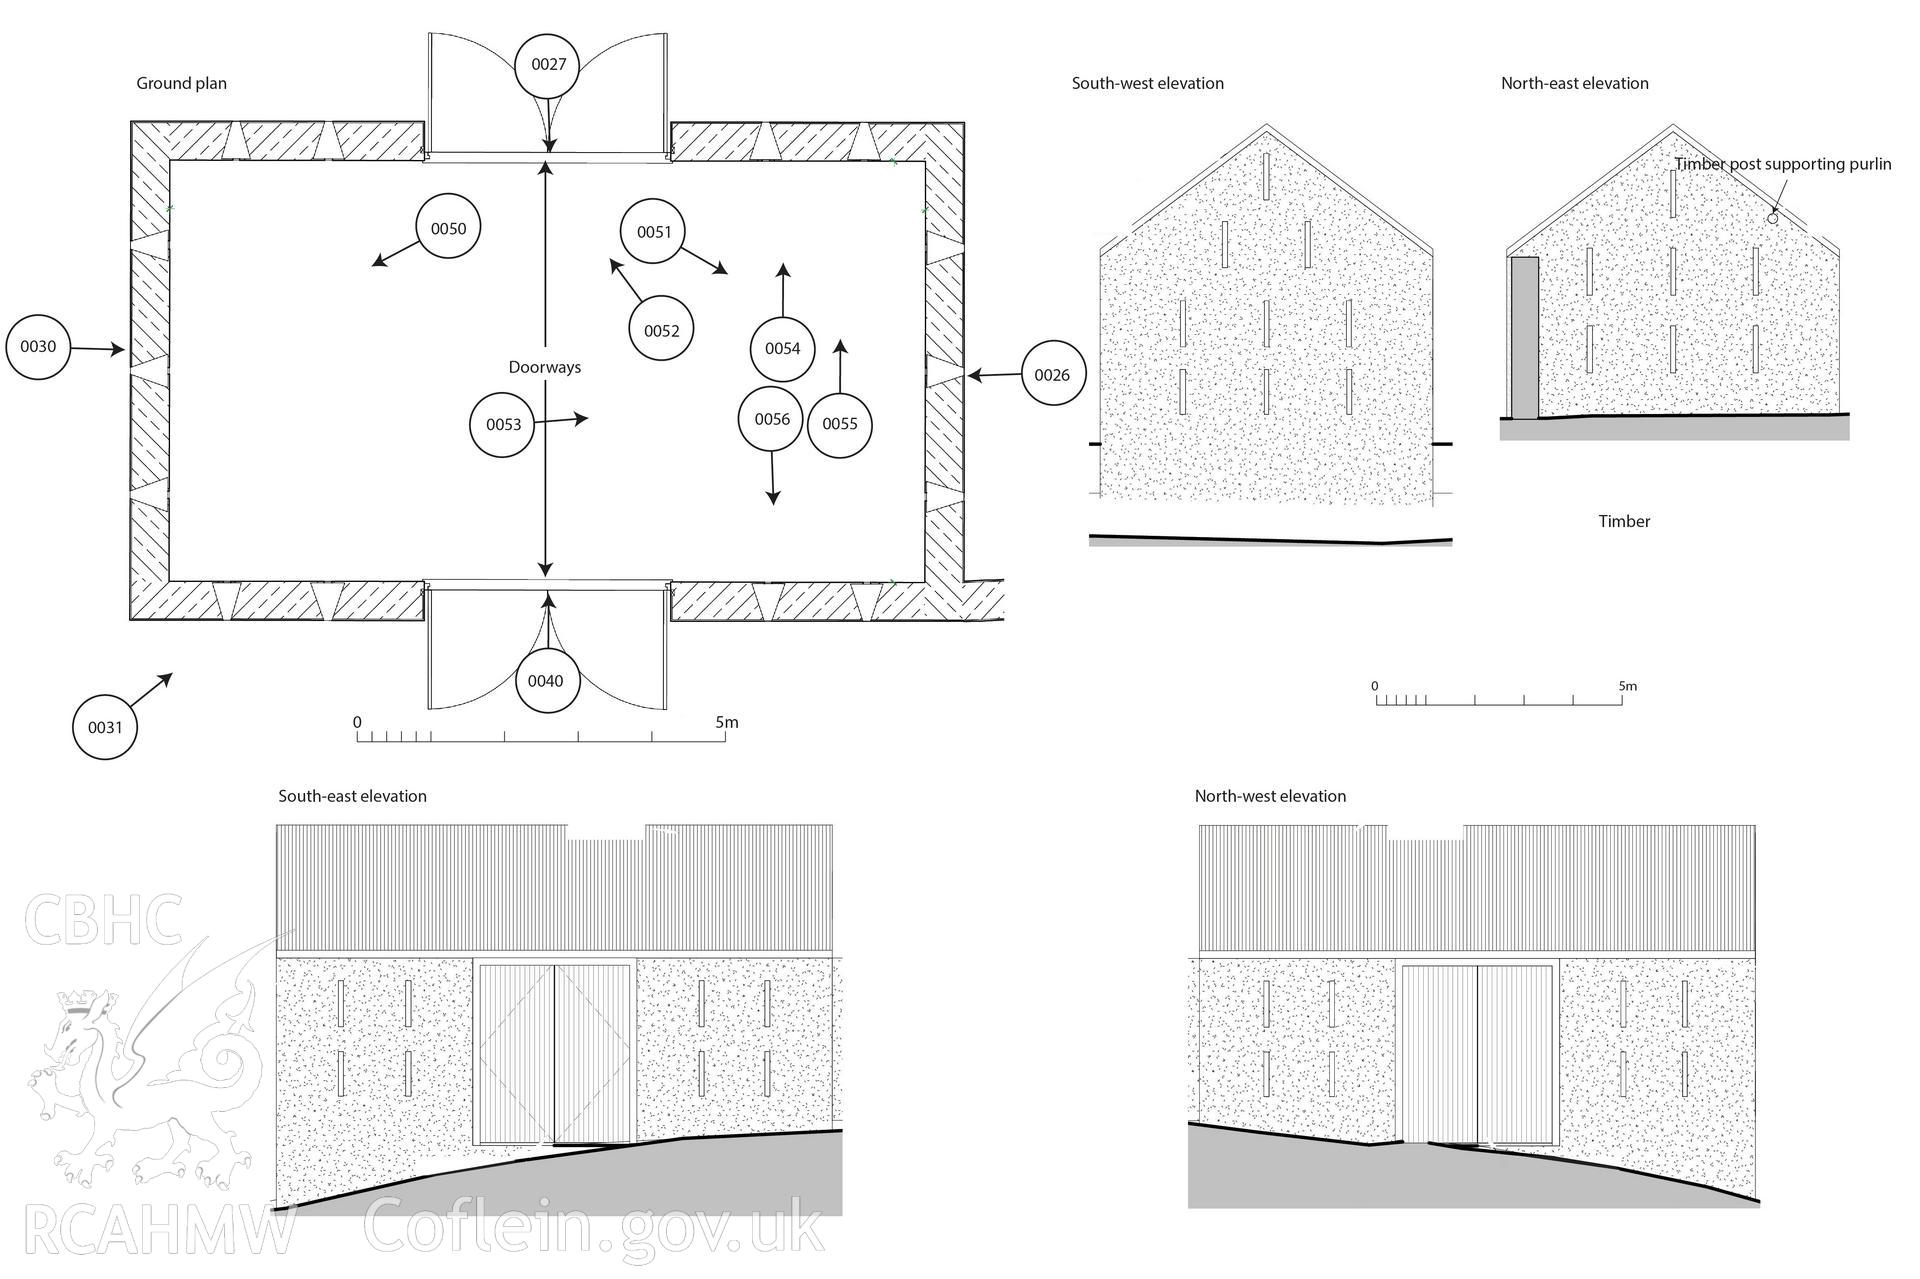 Report illustration labelled 'barn' relating to CPAT Project 2355: Little Lloyney Farm, Clyro, Powys, 2019. Prepared by Will Logan of Clwyd Powys Archaeological Trust. Project no. 2355. HER event PRN: 140287. Planning application no. 18/0506/FUL.